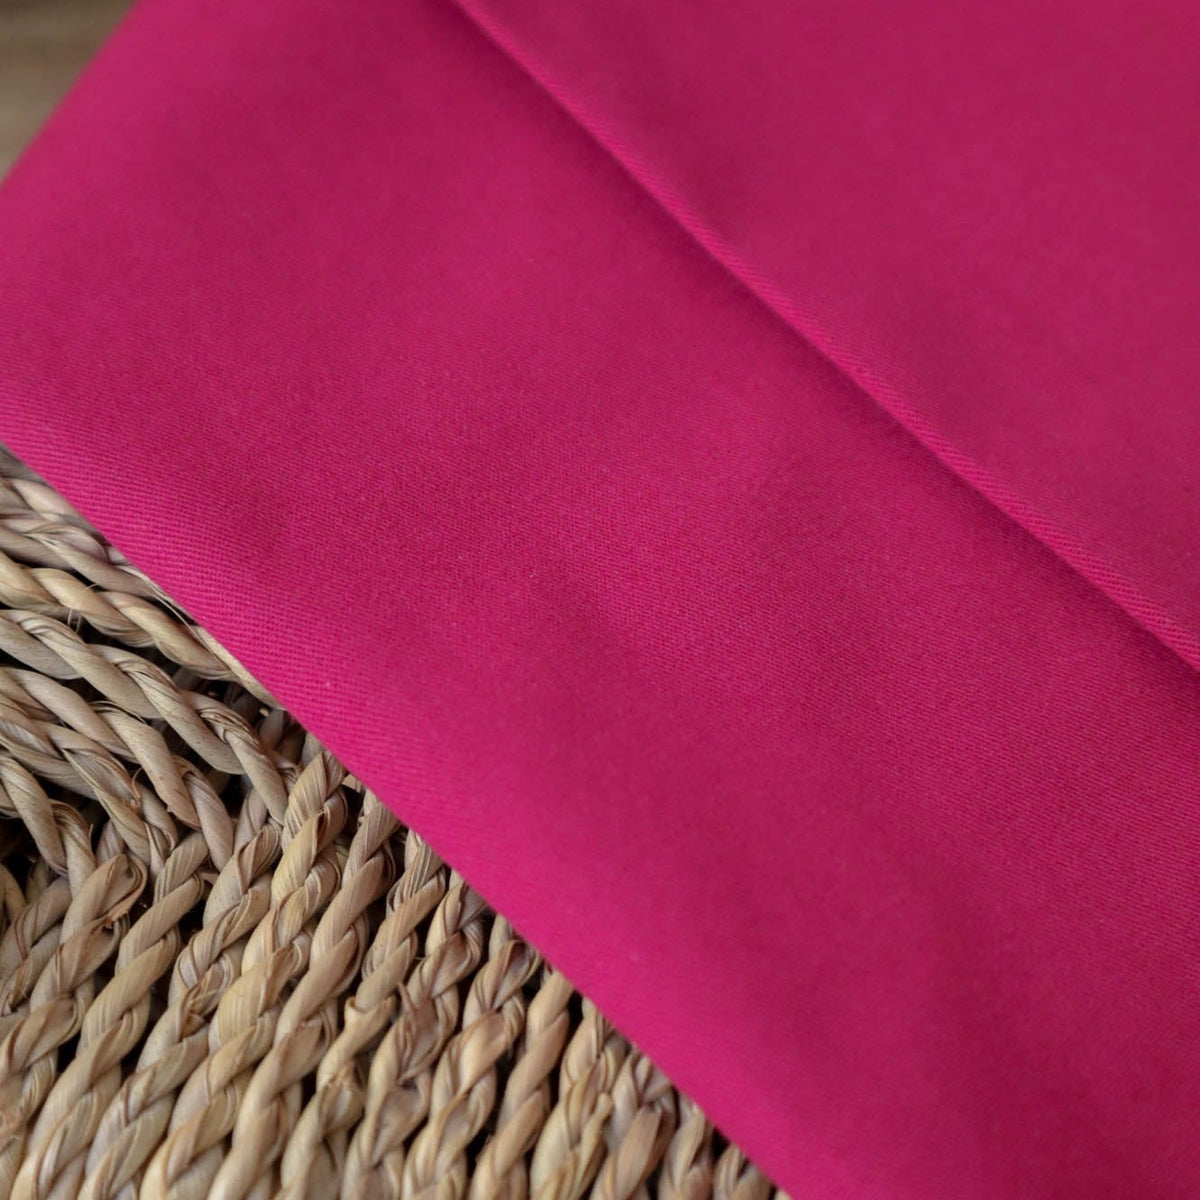 Fashion Fabrics Club Raspberry Pink Solid Stretch Cotton Sateen Woven Fabric by The Yard (98% Cotton-2% Spandex)